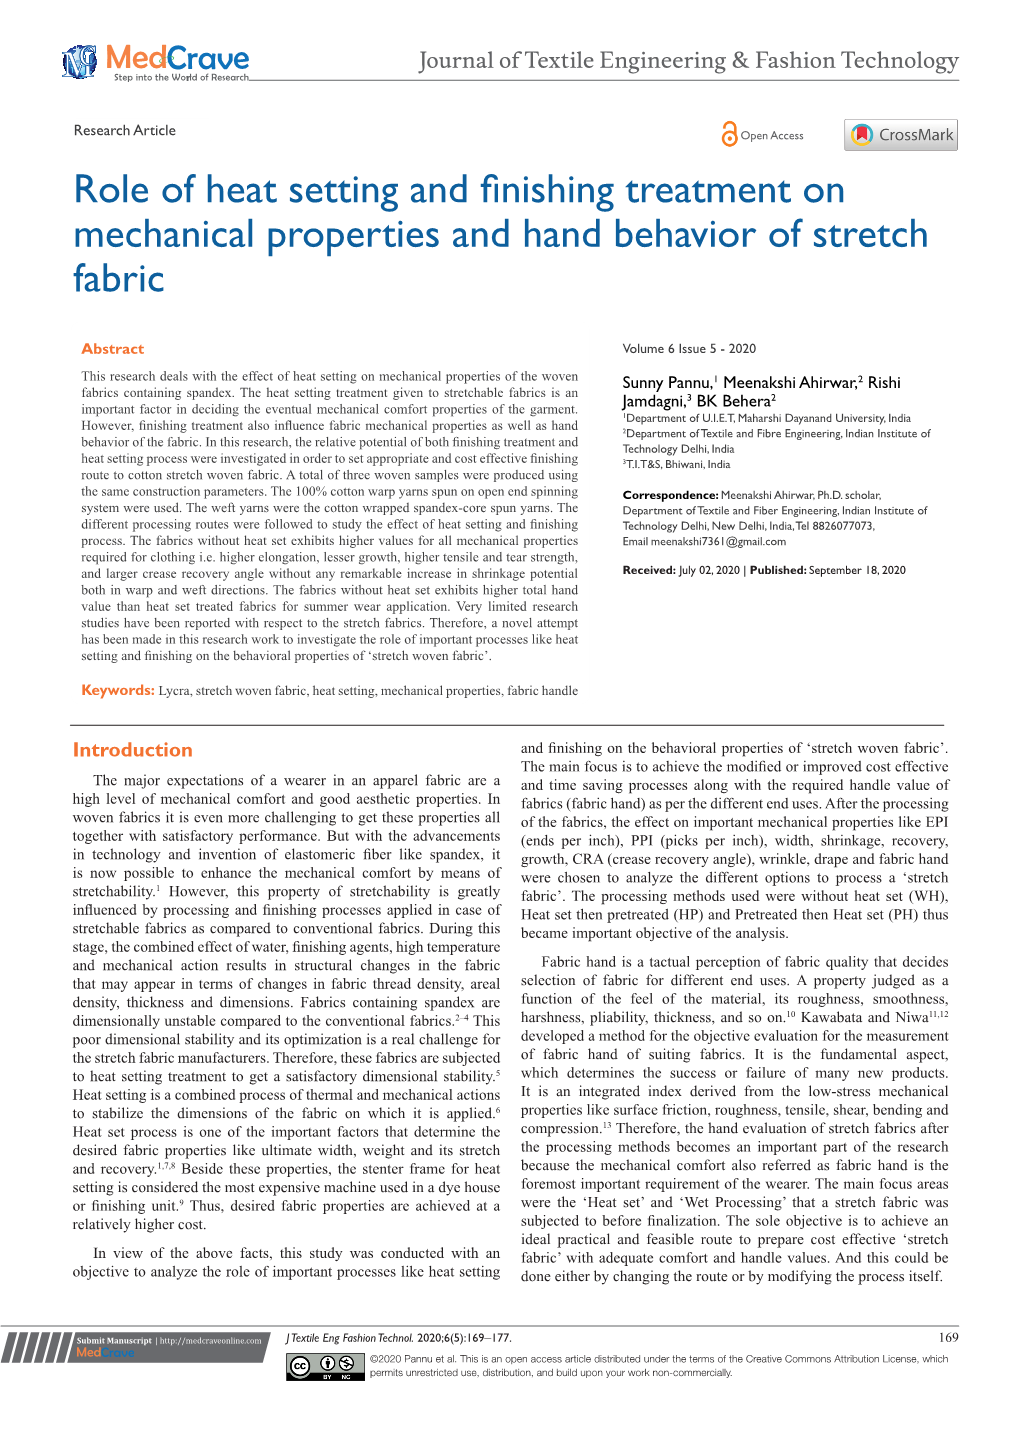 Role of Heat Setting and Finishing Treatment on Mechanical Properties and Hand Behavior of Stretch Fabric